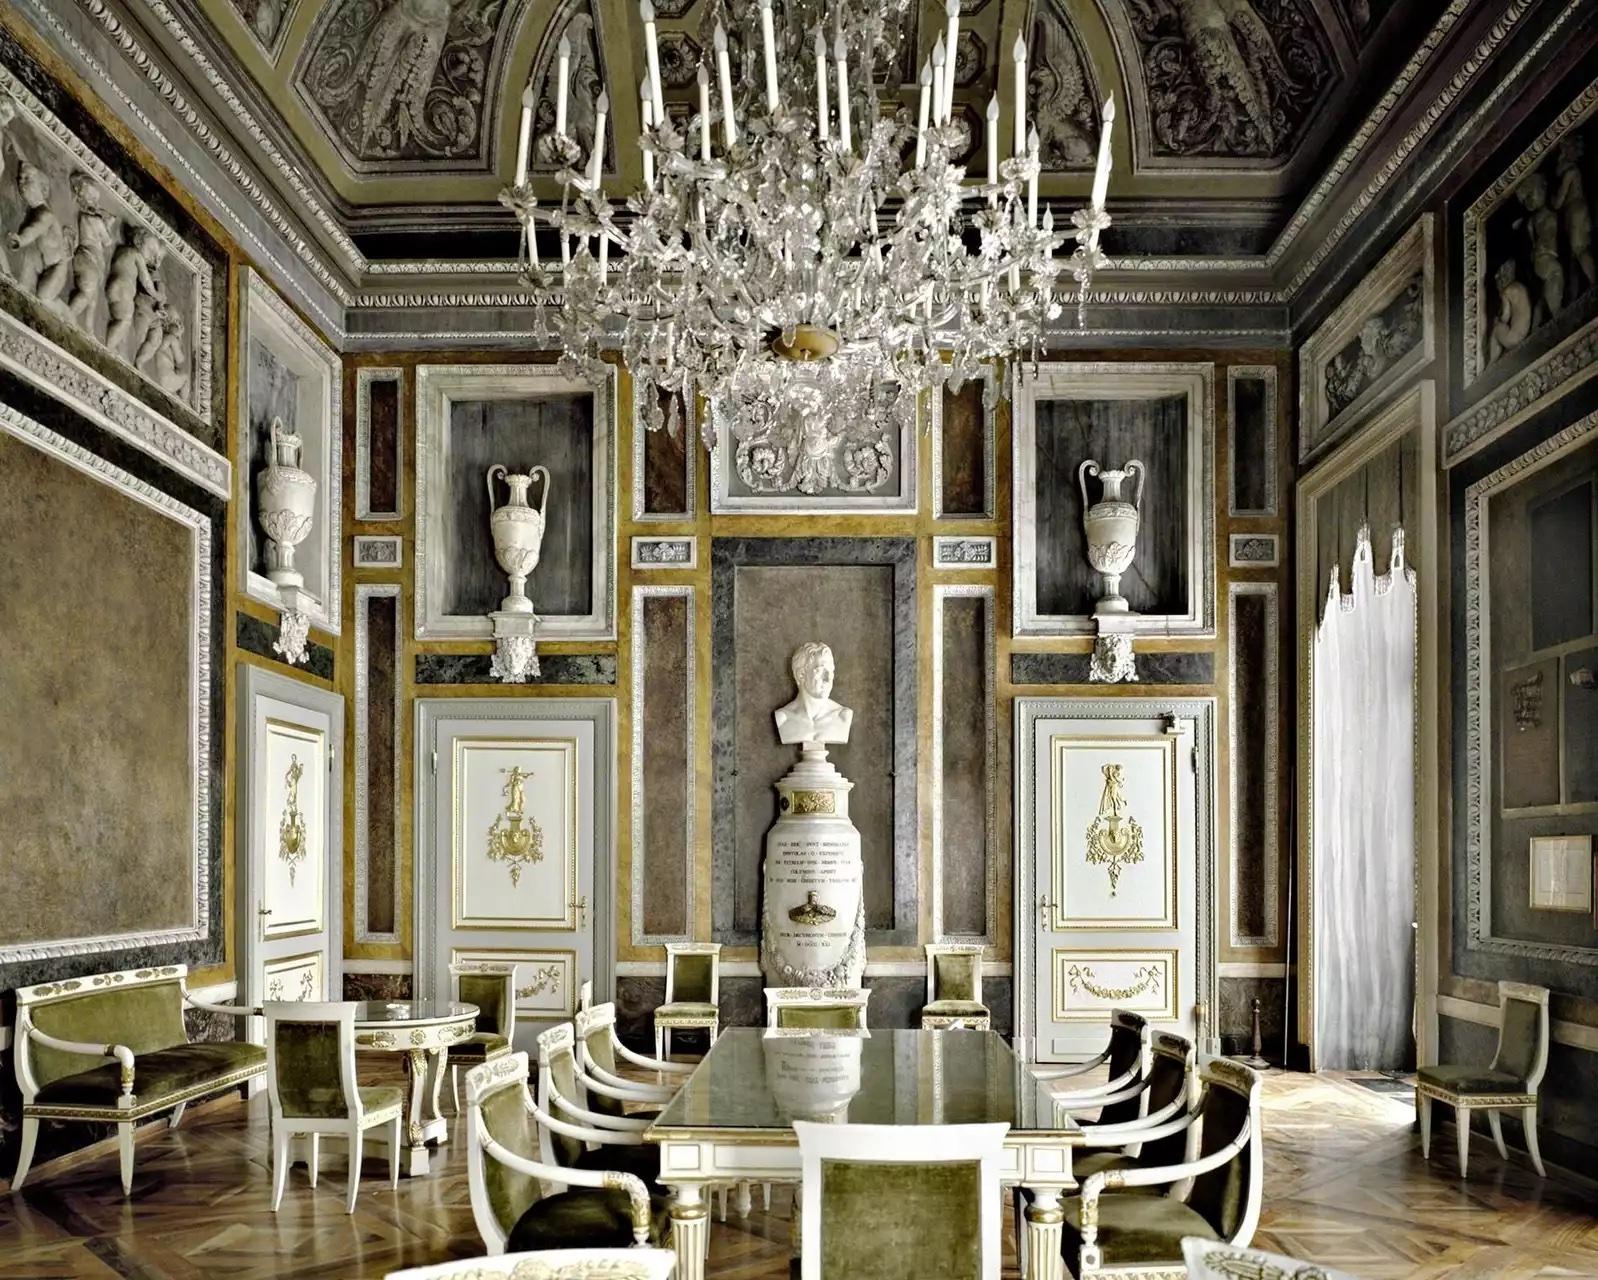 Palazzo Tursi, Genova, Italy, 2004
Chromogenic print
180 x 225 cm
Edition of 5

Italian, b. 1954, Florence, Italy, based in Florence, Italy Massimo Listri travels his native Italy and the world with his camera, photographing grand interior spaces